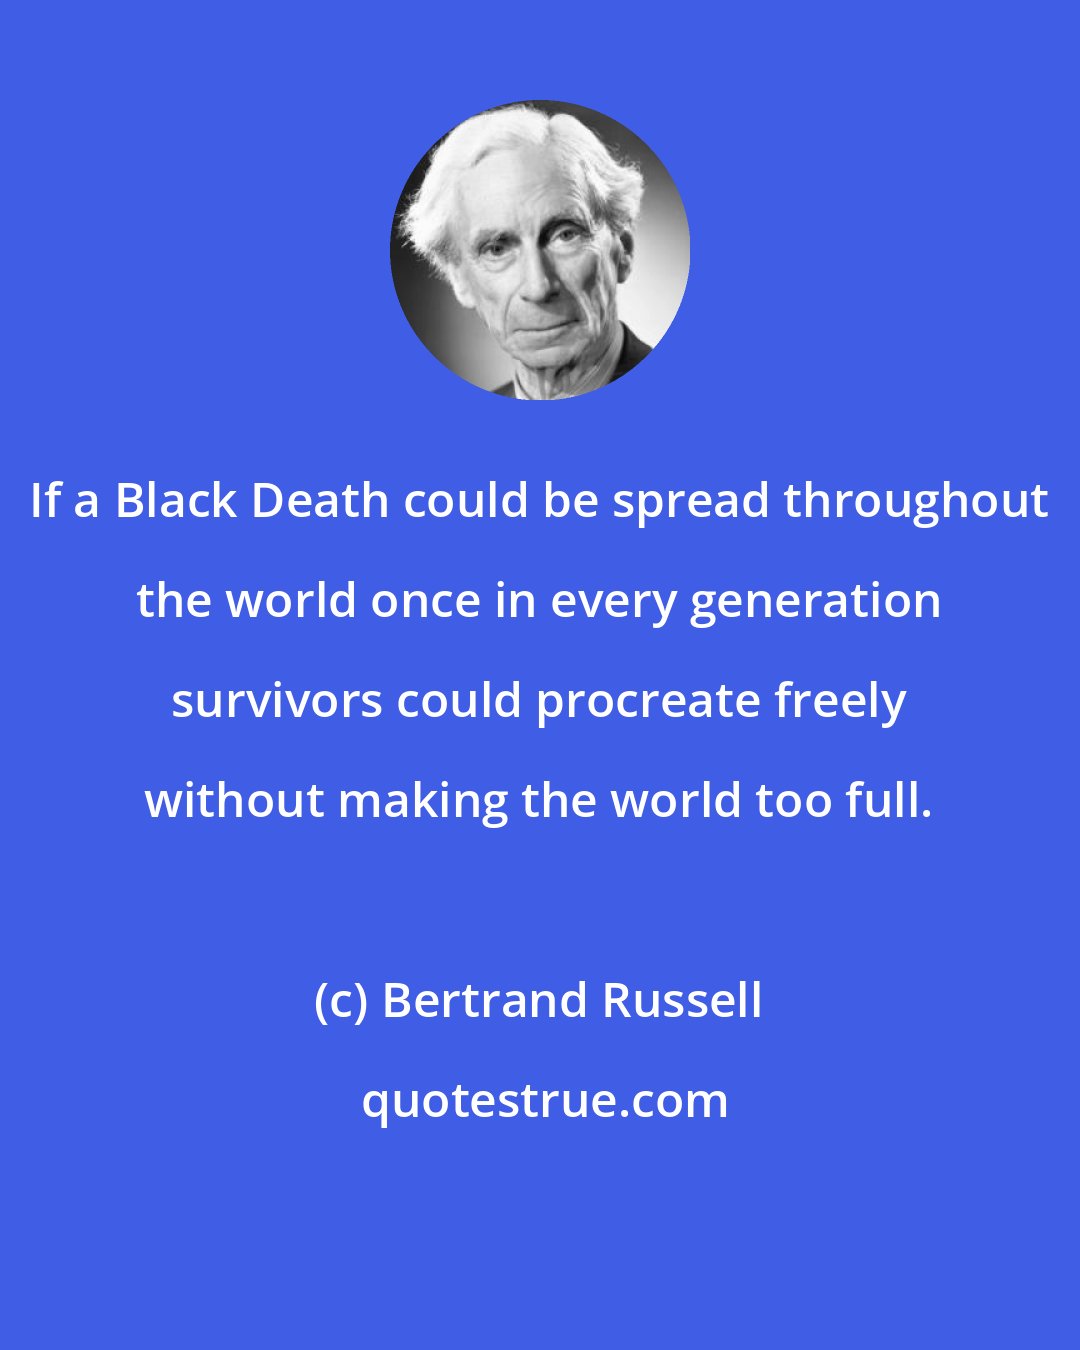 Bertrand Russell: If a Black Death could be spread throughout the world once in every generation survivors could procreate freely without making the world too full.